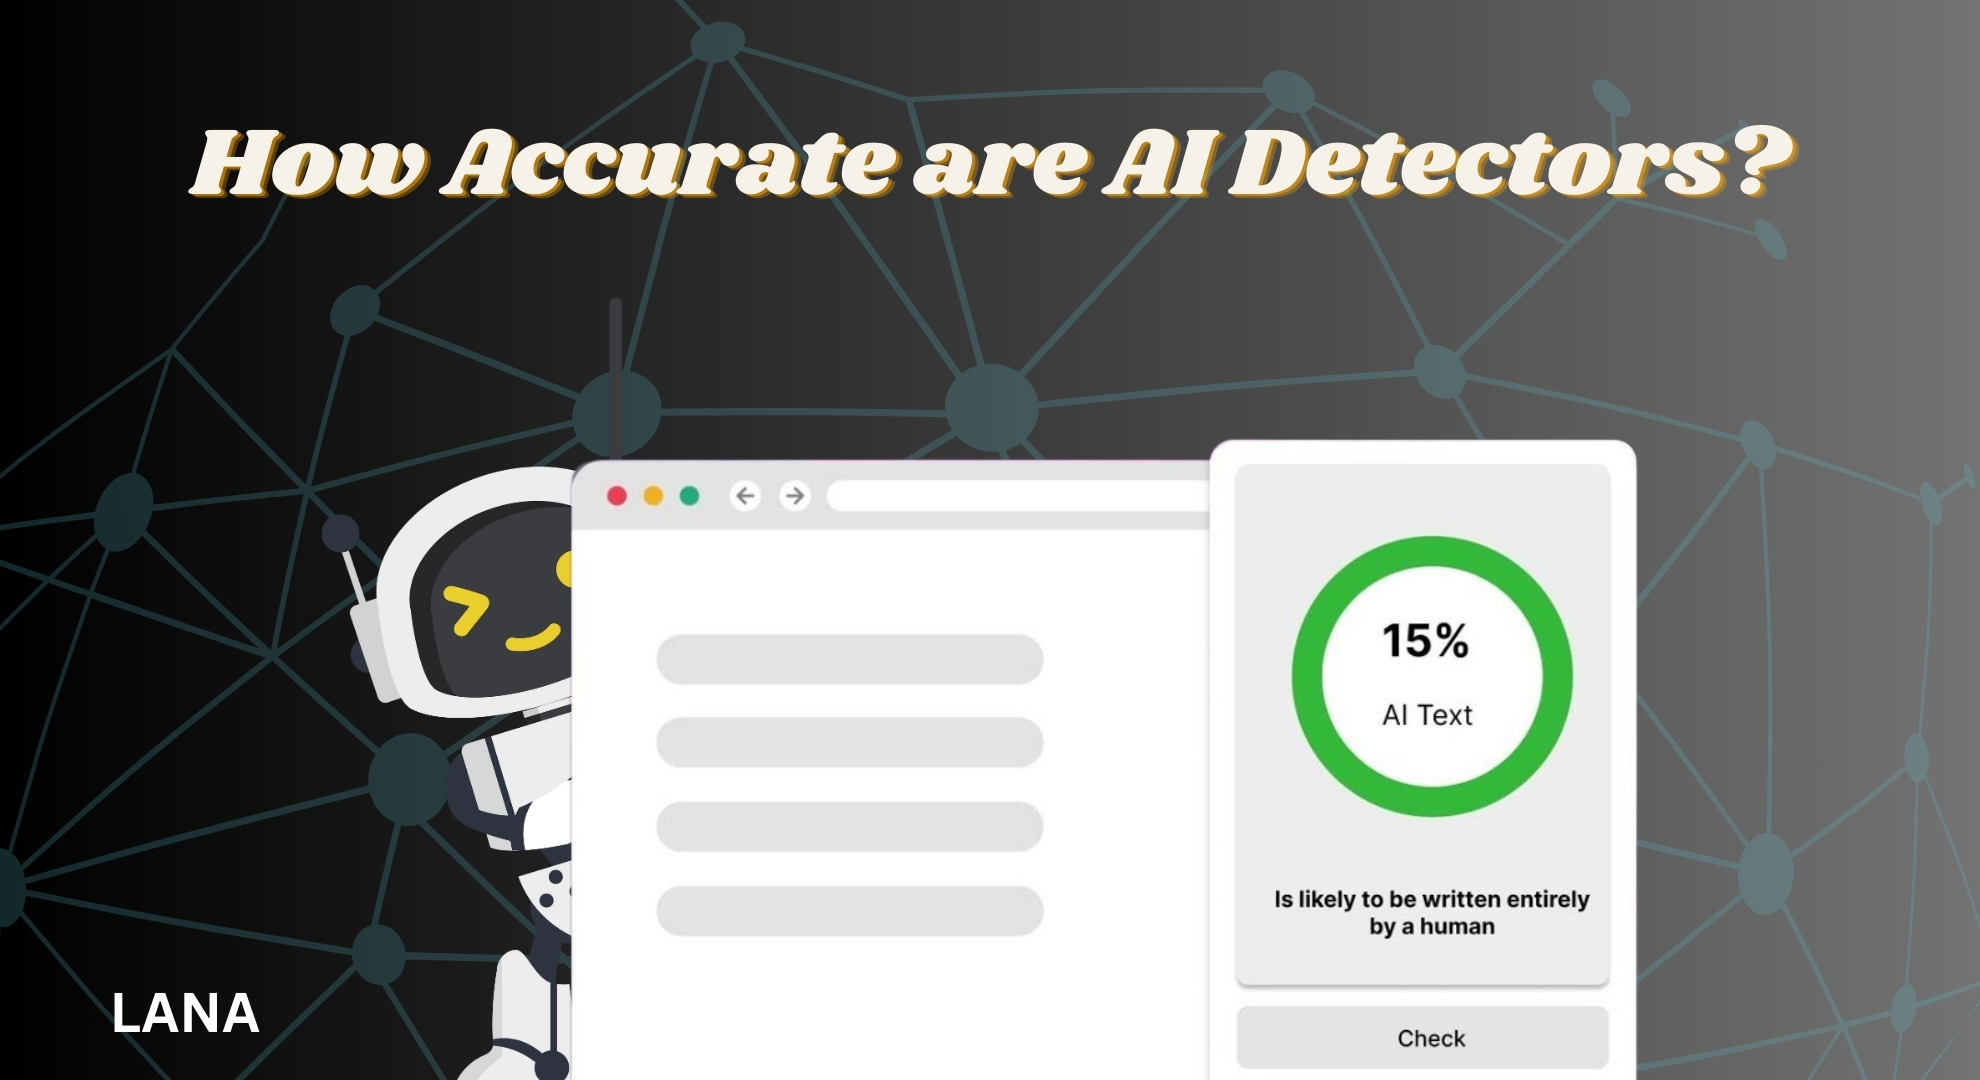 How Accurate are AI Detectors